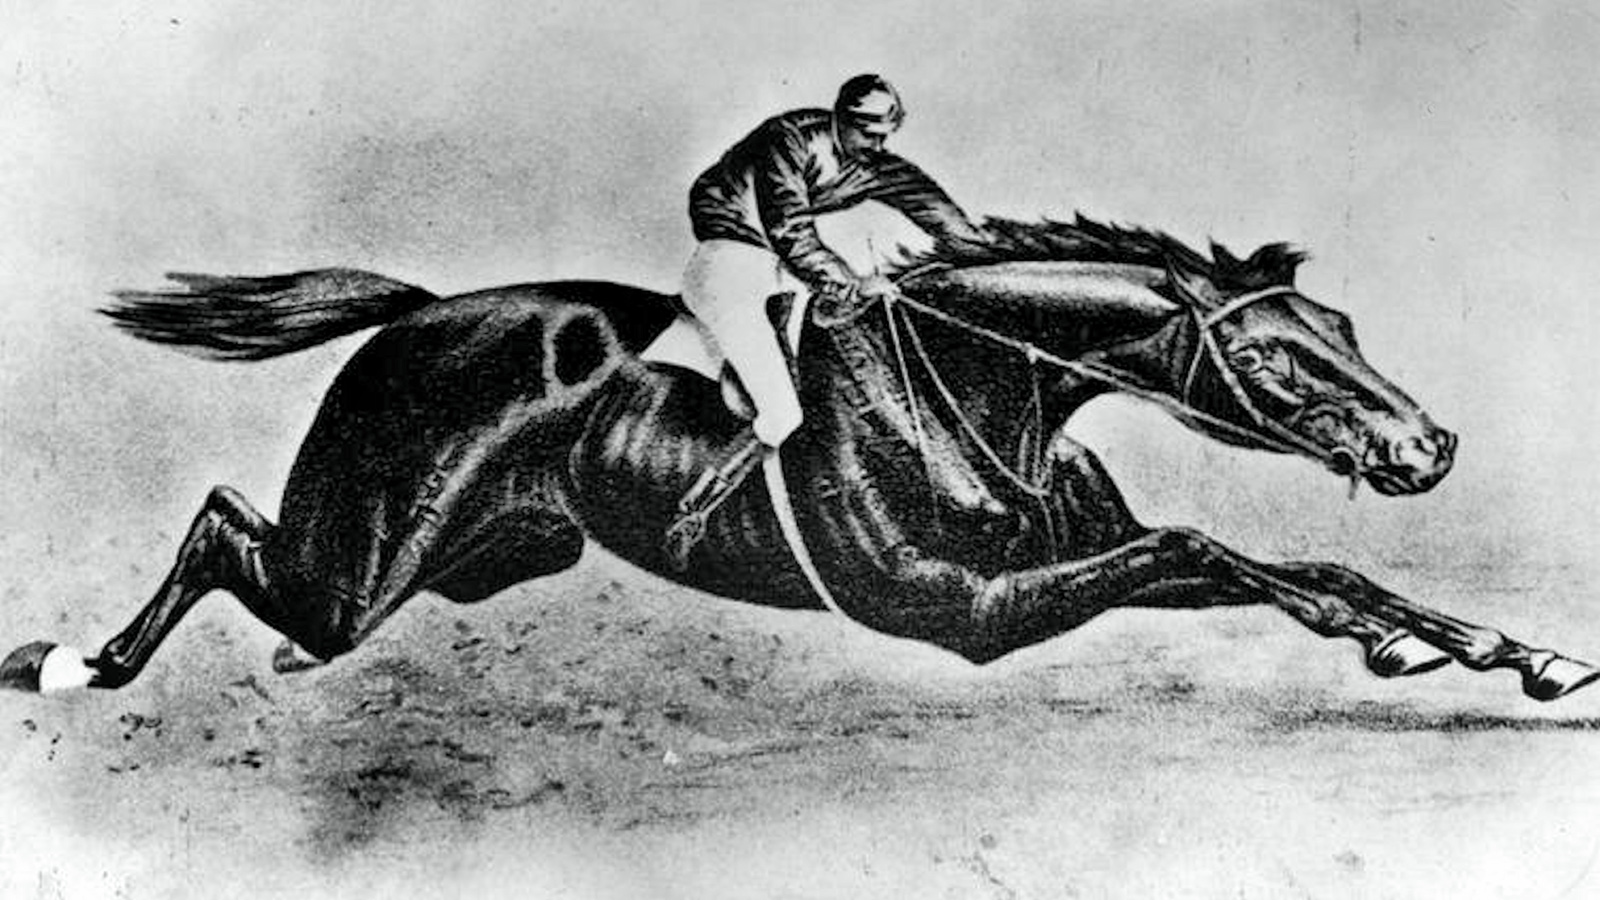 An illustration of Preakness (Keeneland Library Collection)